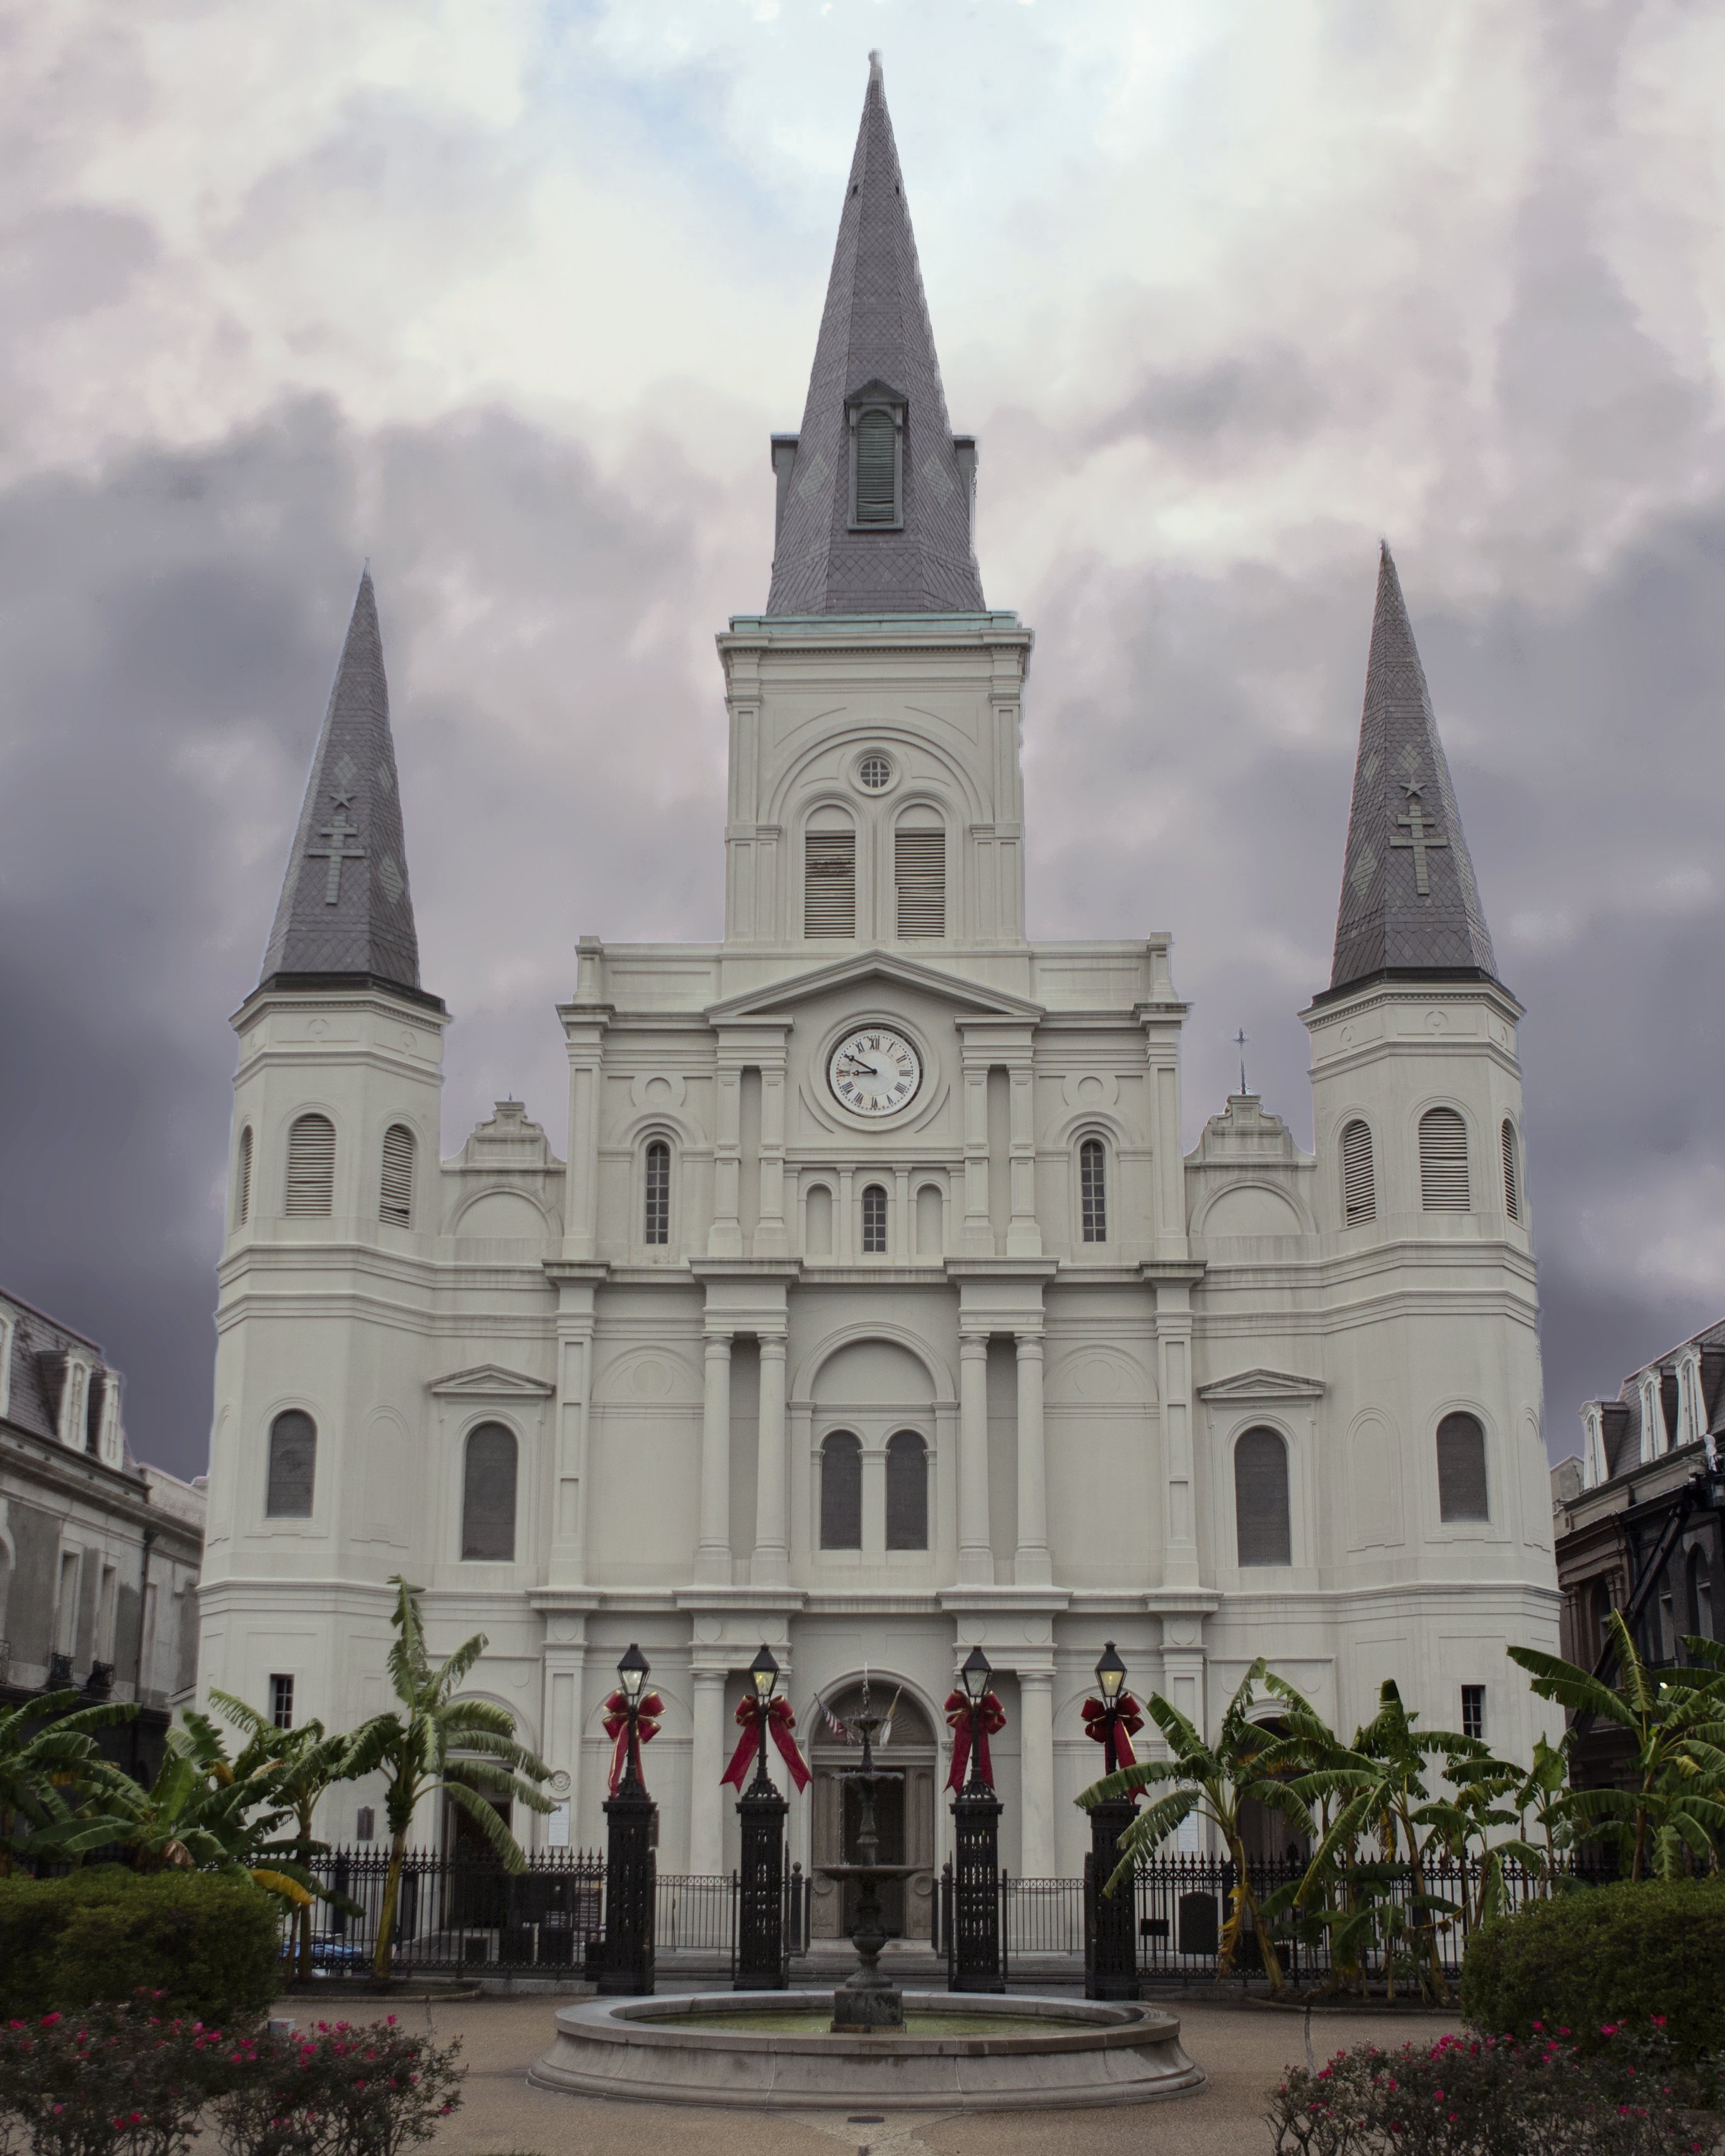 A church in New Orleans